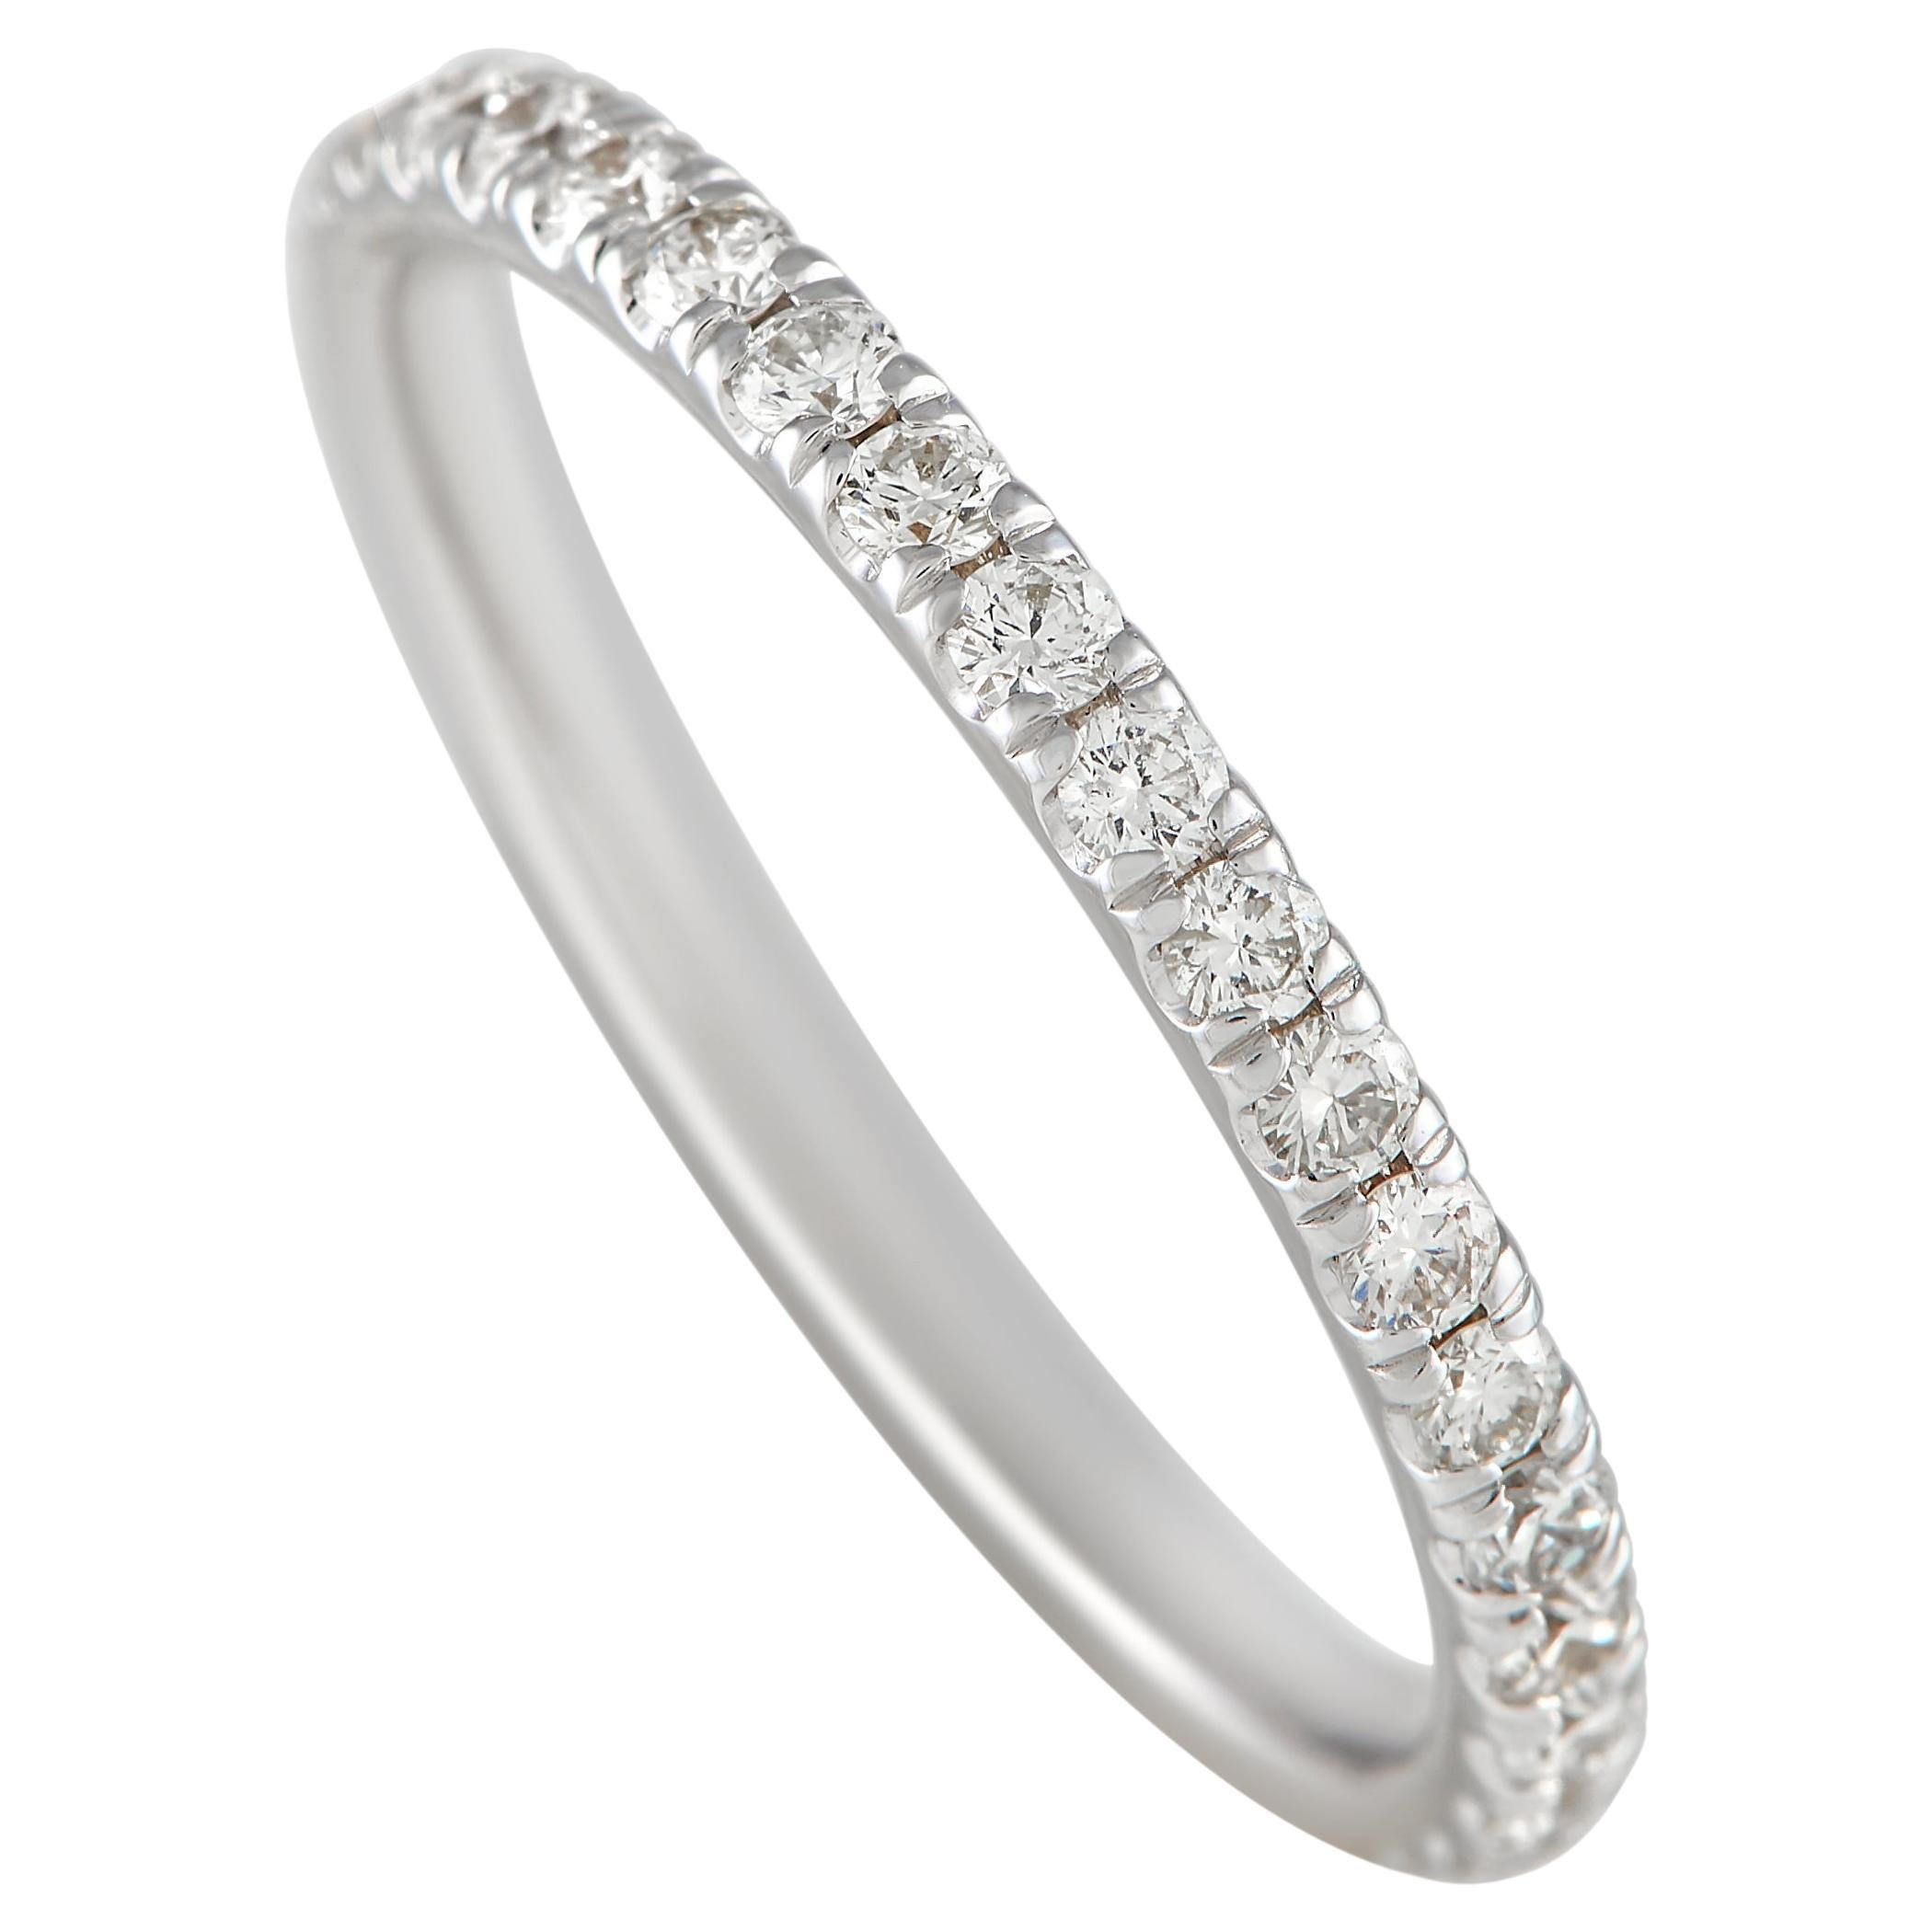 LB Exclusive 14K White Gold 0.63ct Diamond Eternity Band Ring